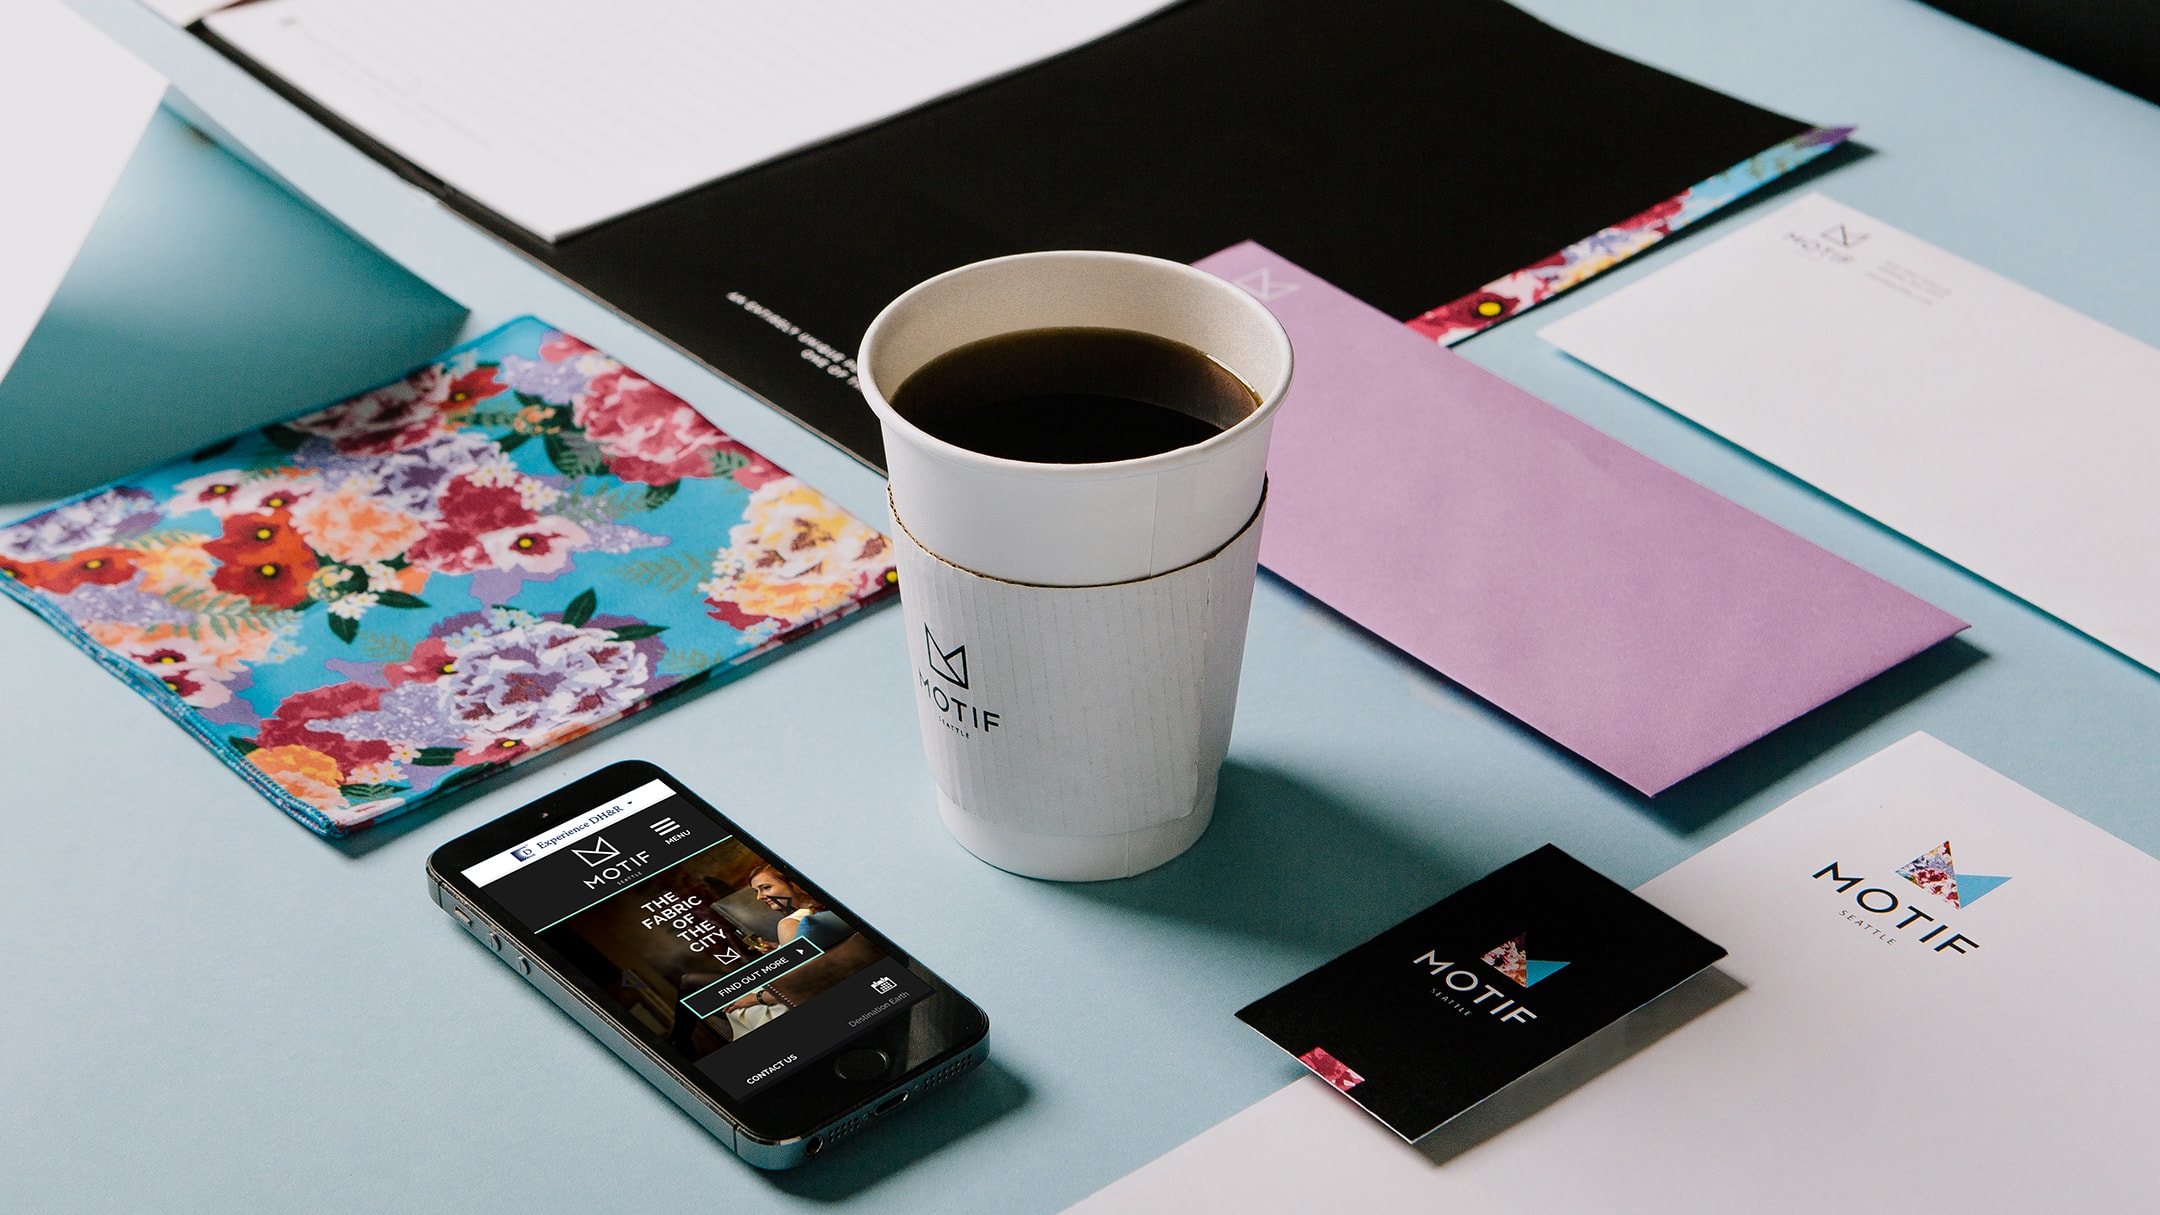 Motif Seattle collateral, iPhone app, and branded coffee cup